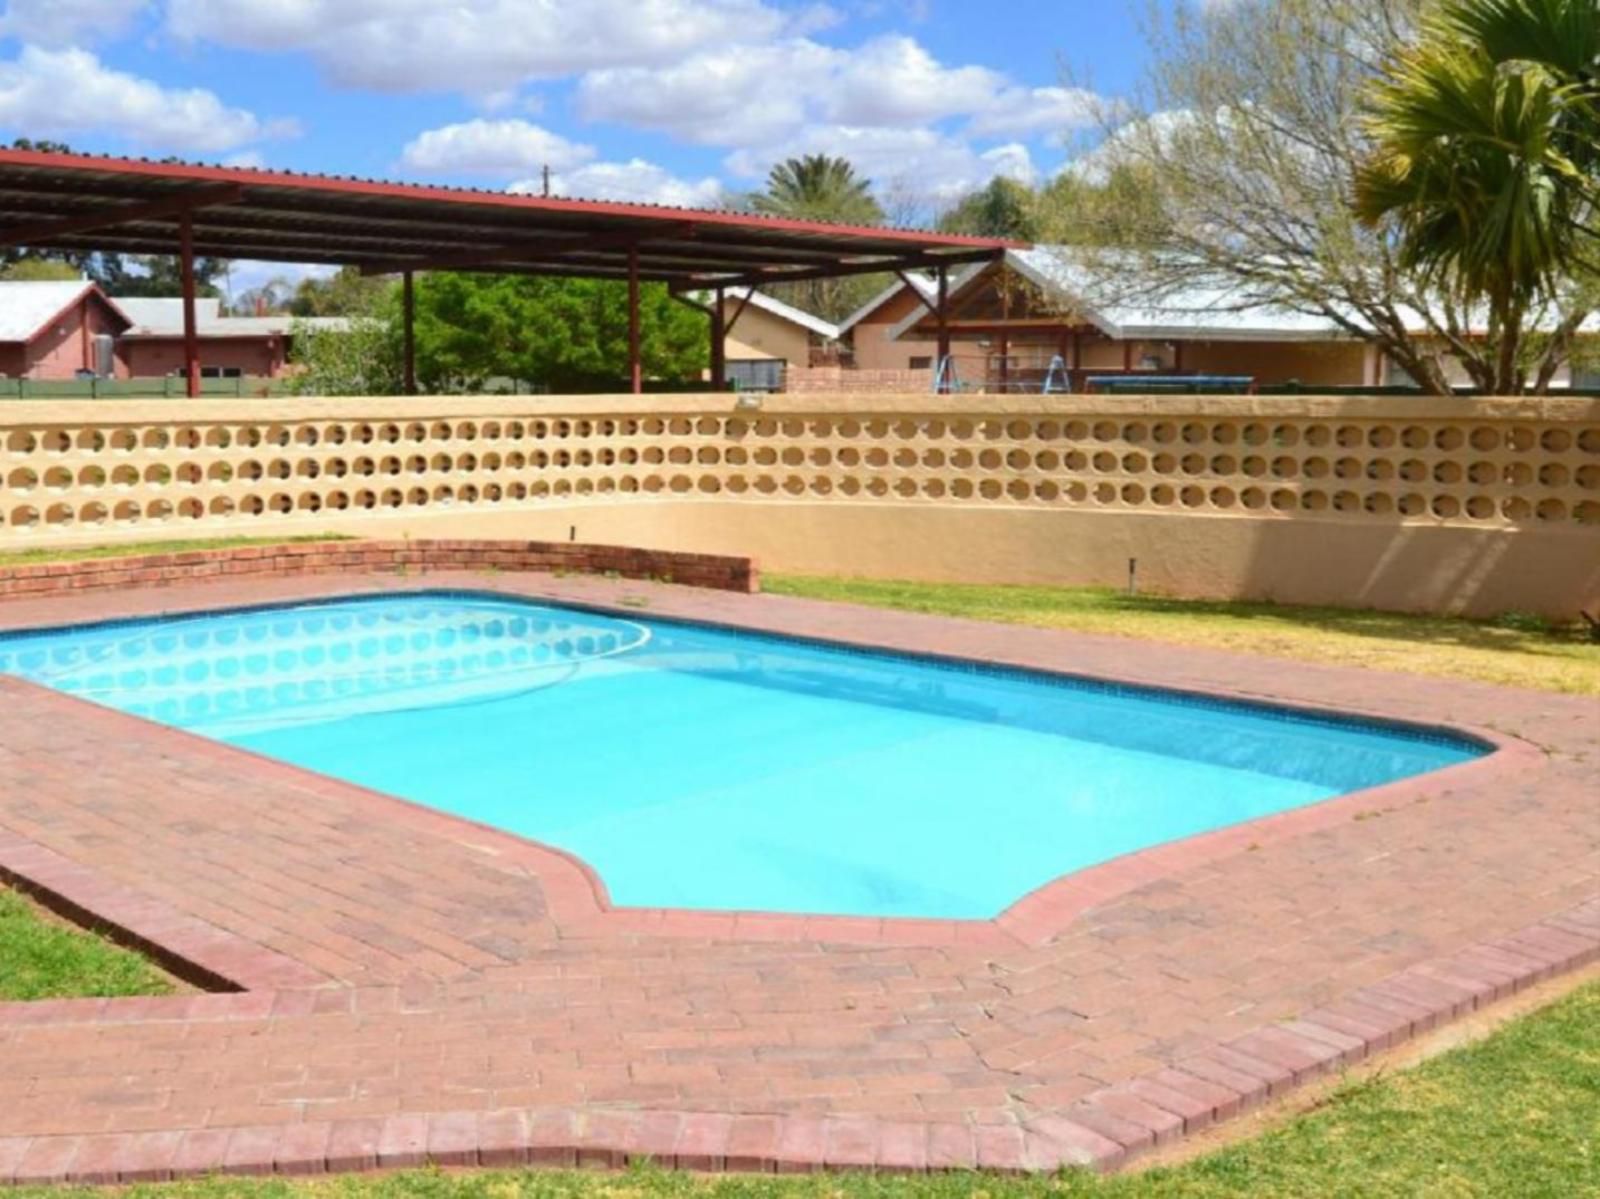 Hadida Guest House Kimberley Northern Cape South Africa Complementary Colors, Colorful, Swimming Pool